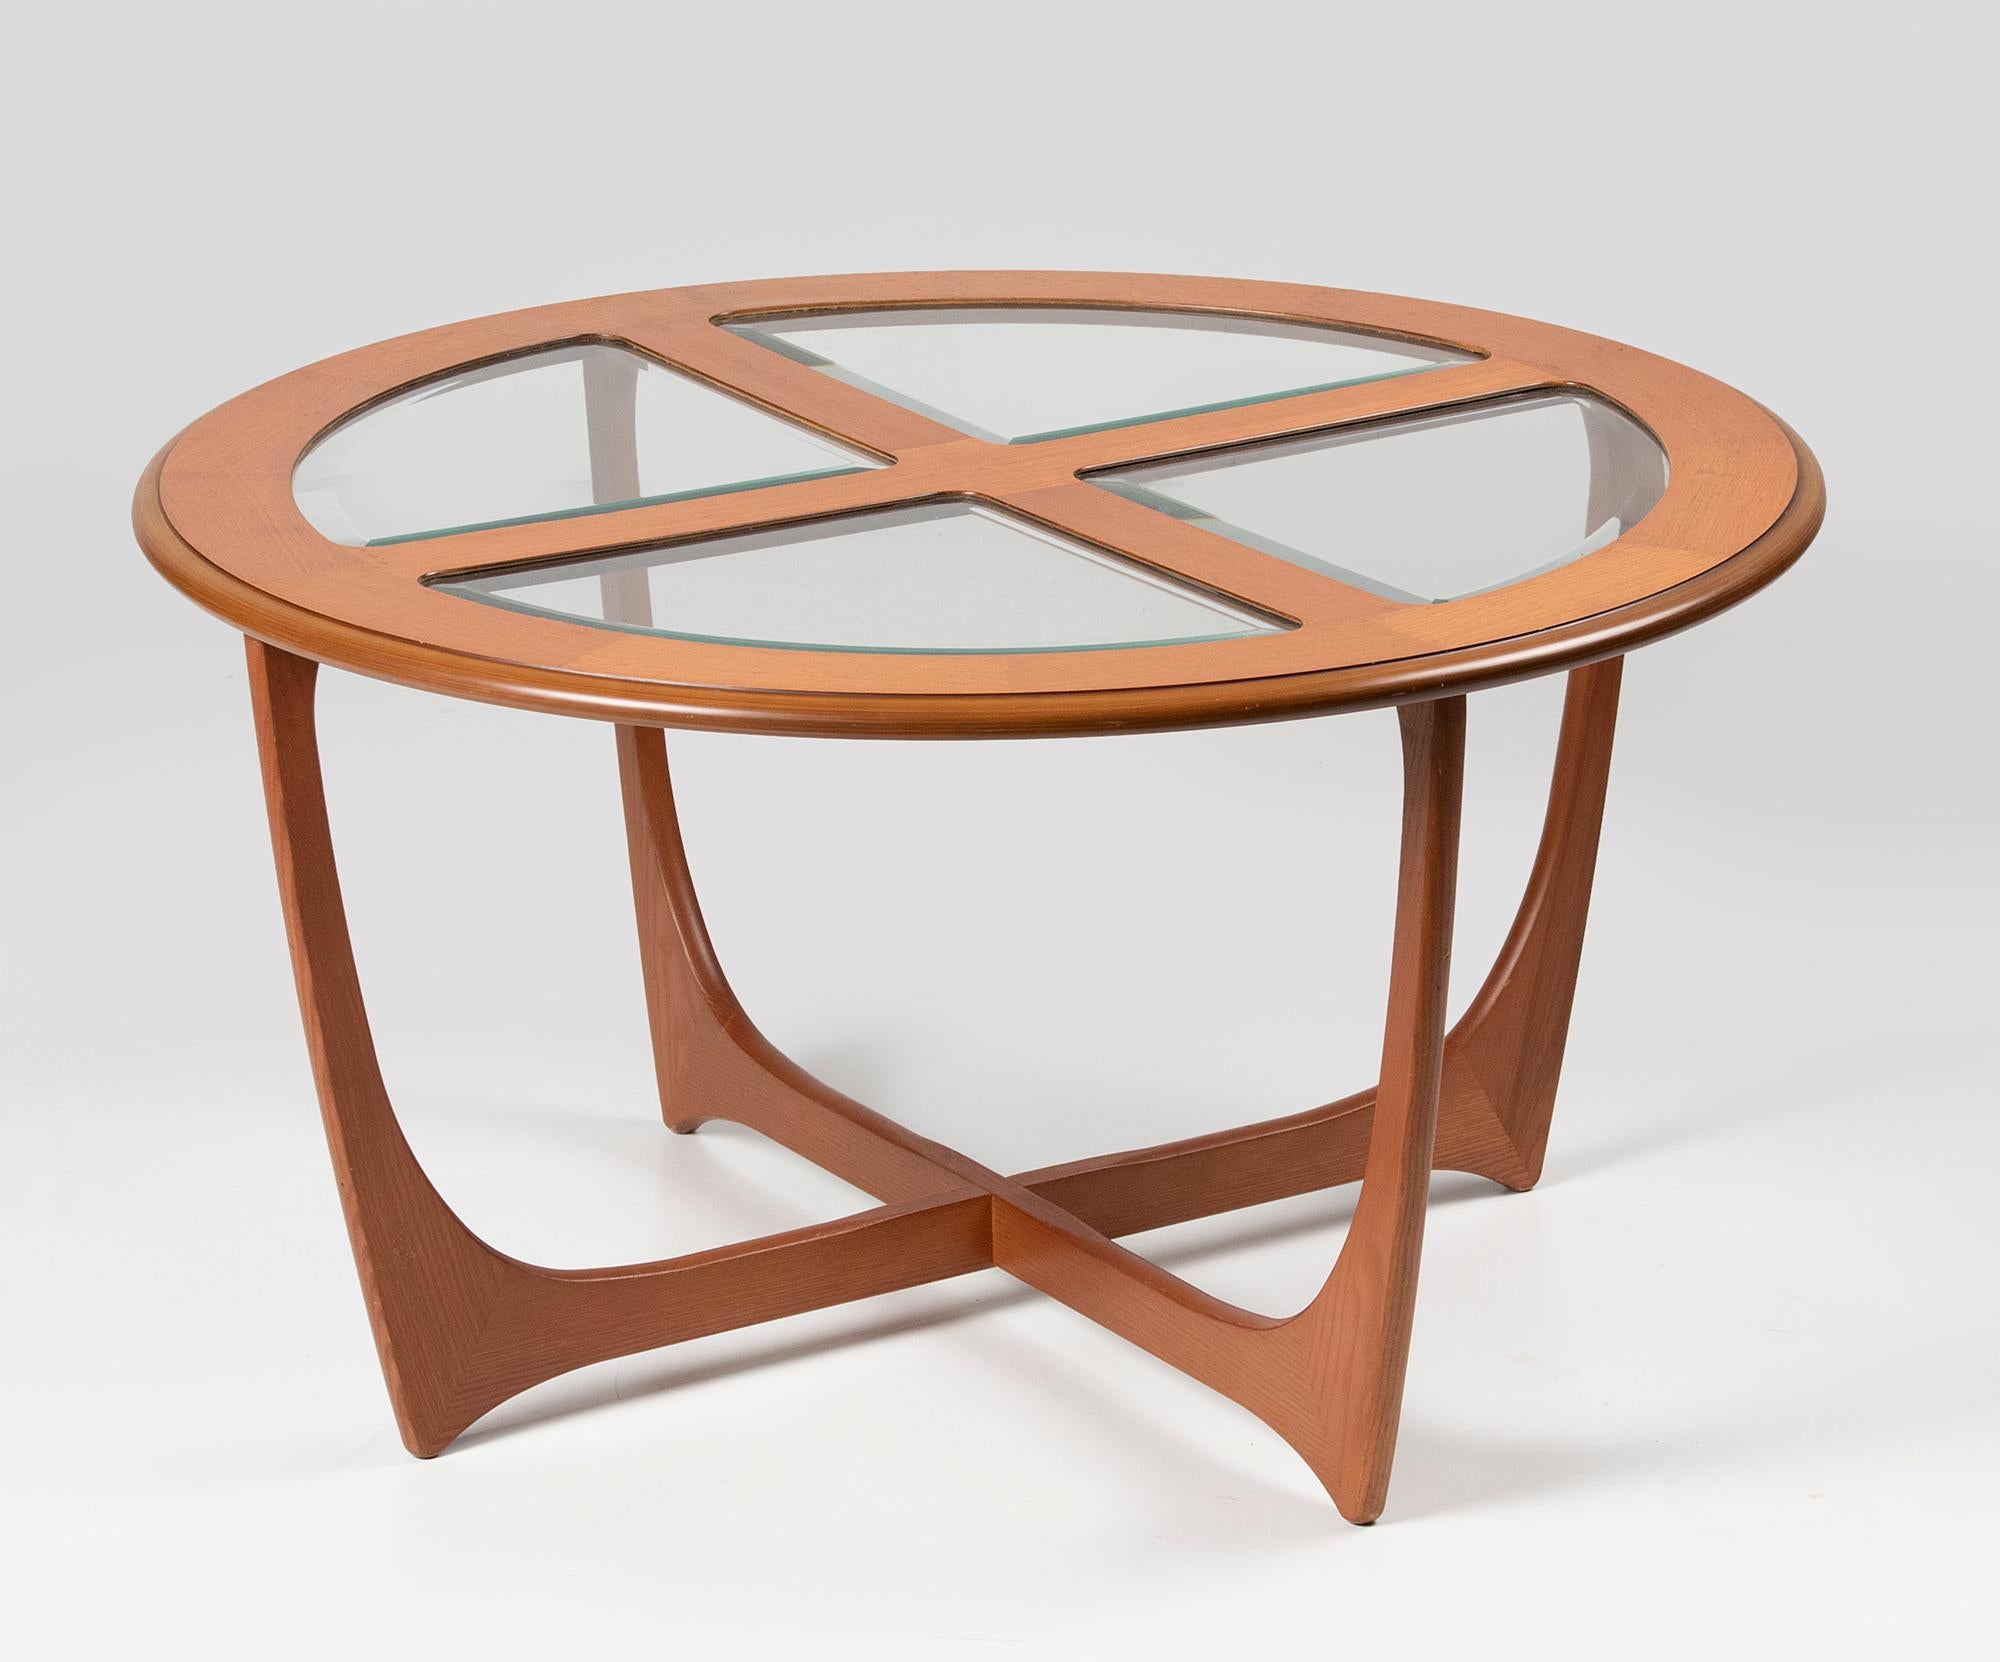 An iconic round G-Plan coffee table. Attributed to Victor Wilkins. The top is made of veneered teak wood. The base is made of solid Afromosia wood (African teak wood). The top is divided into four glass beveled panels.